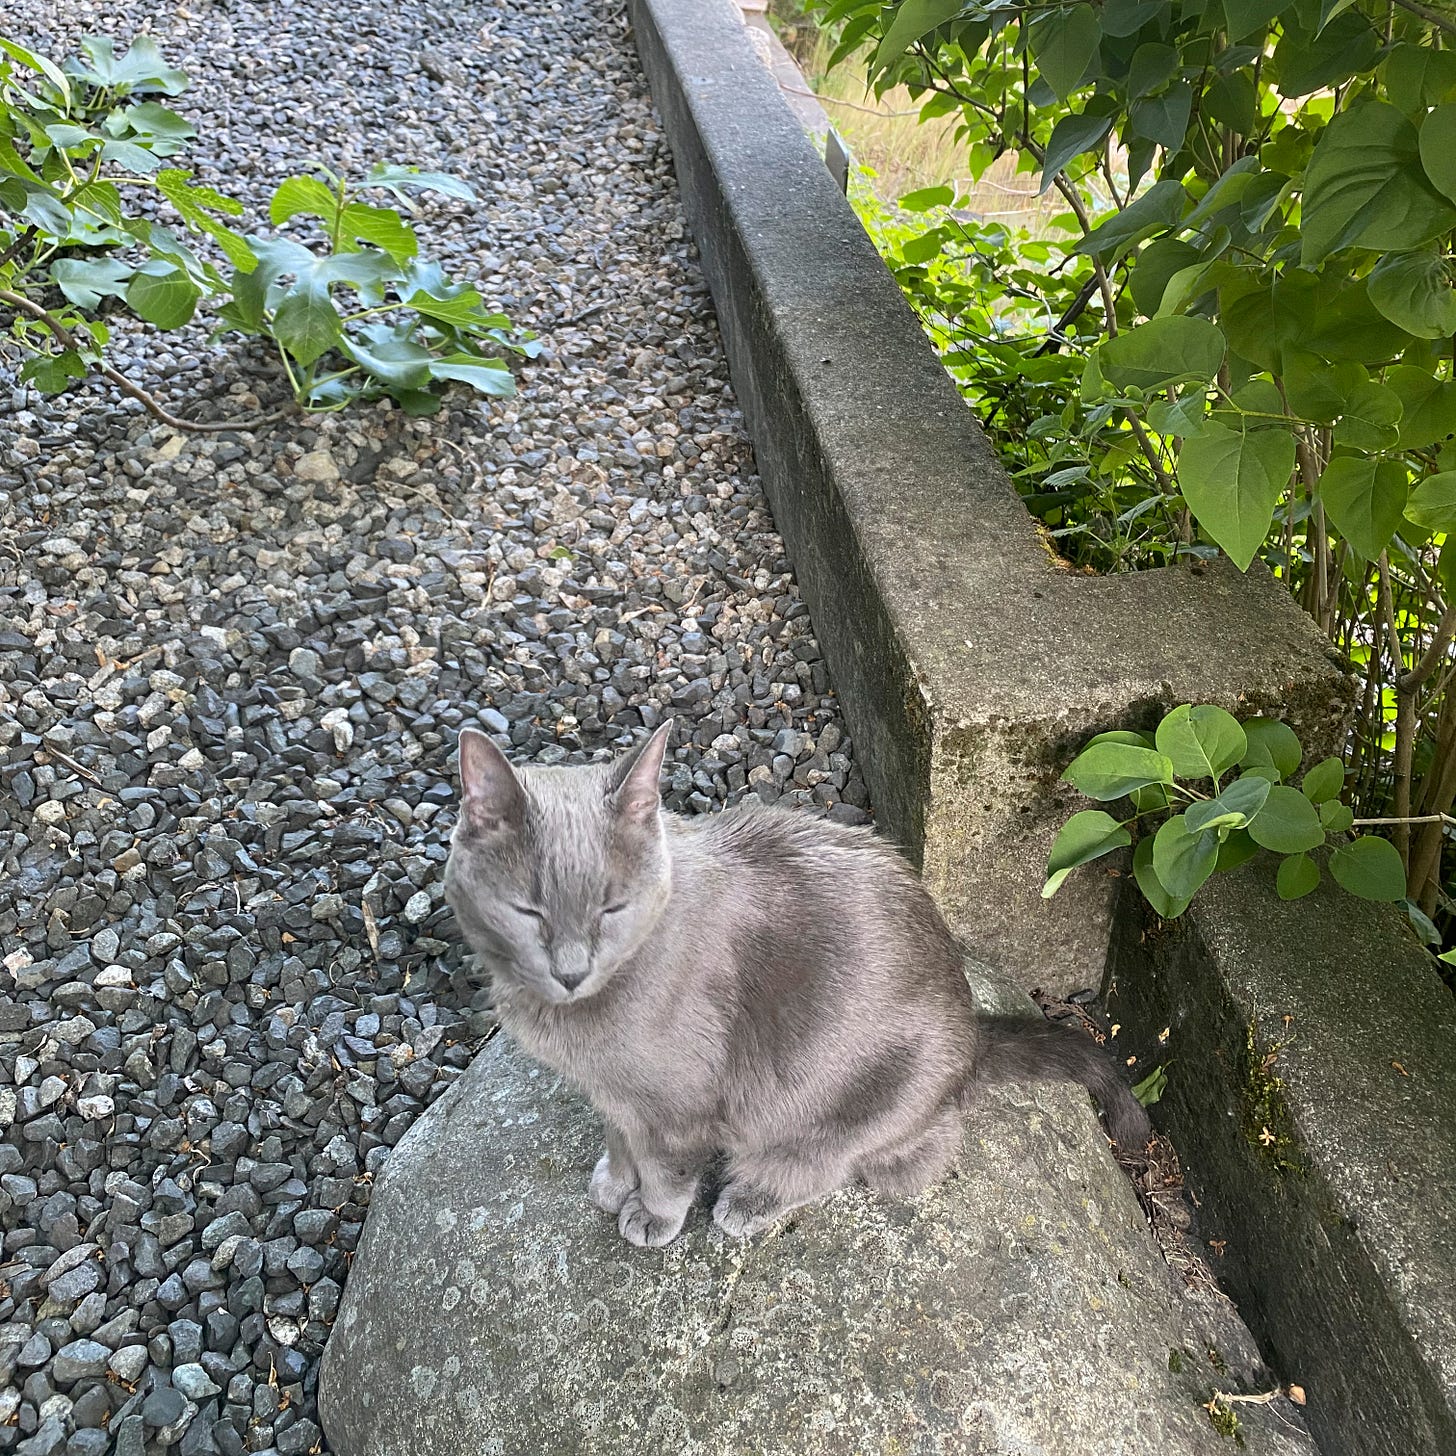 At the edge of the gravel section of our yard, near a cement dividing wall, a small grey cat sits with its eyes closed on a large rock, facing the camera. He is surrounded by the leaves of a fig tree behind and to the left, and those of a lilac bush at the edge of the wall to the right.